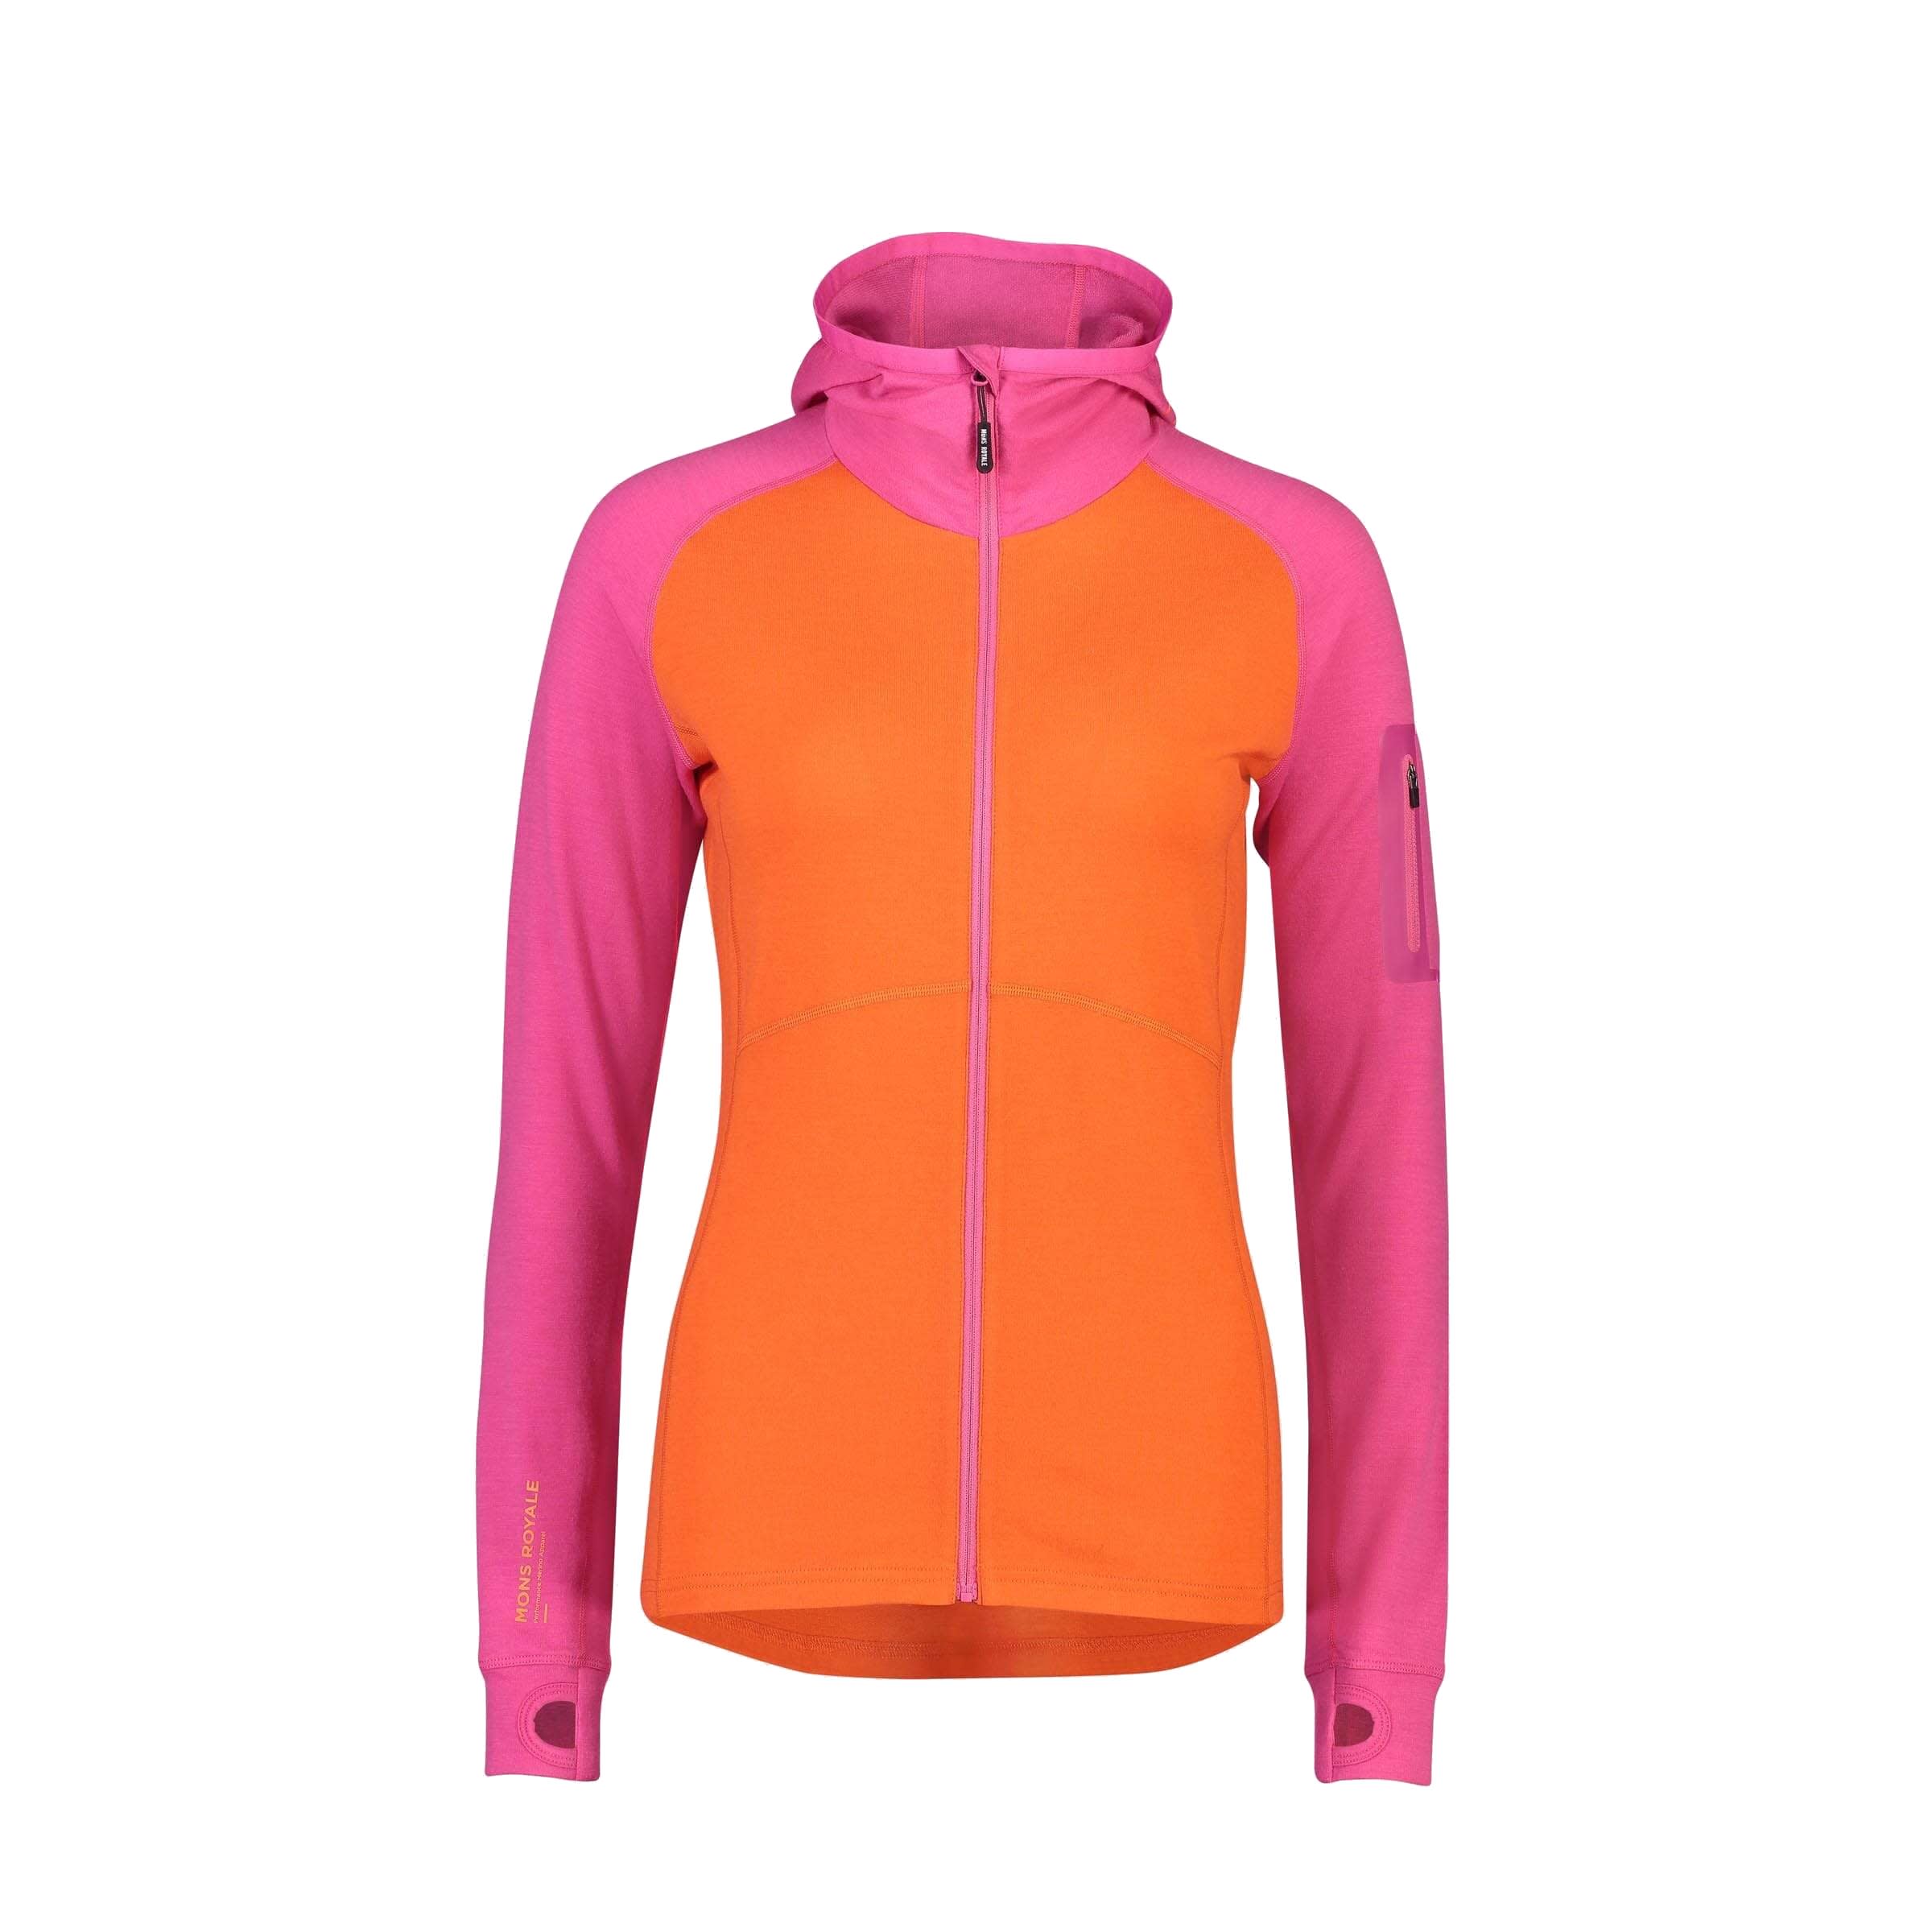 Buy Mons Royale Women's Ascend Midi Full Zip Hood from Outnorth